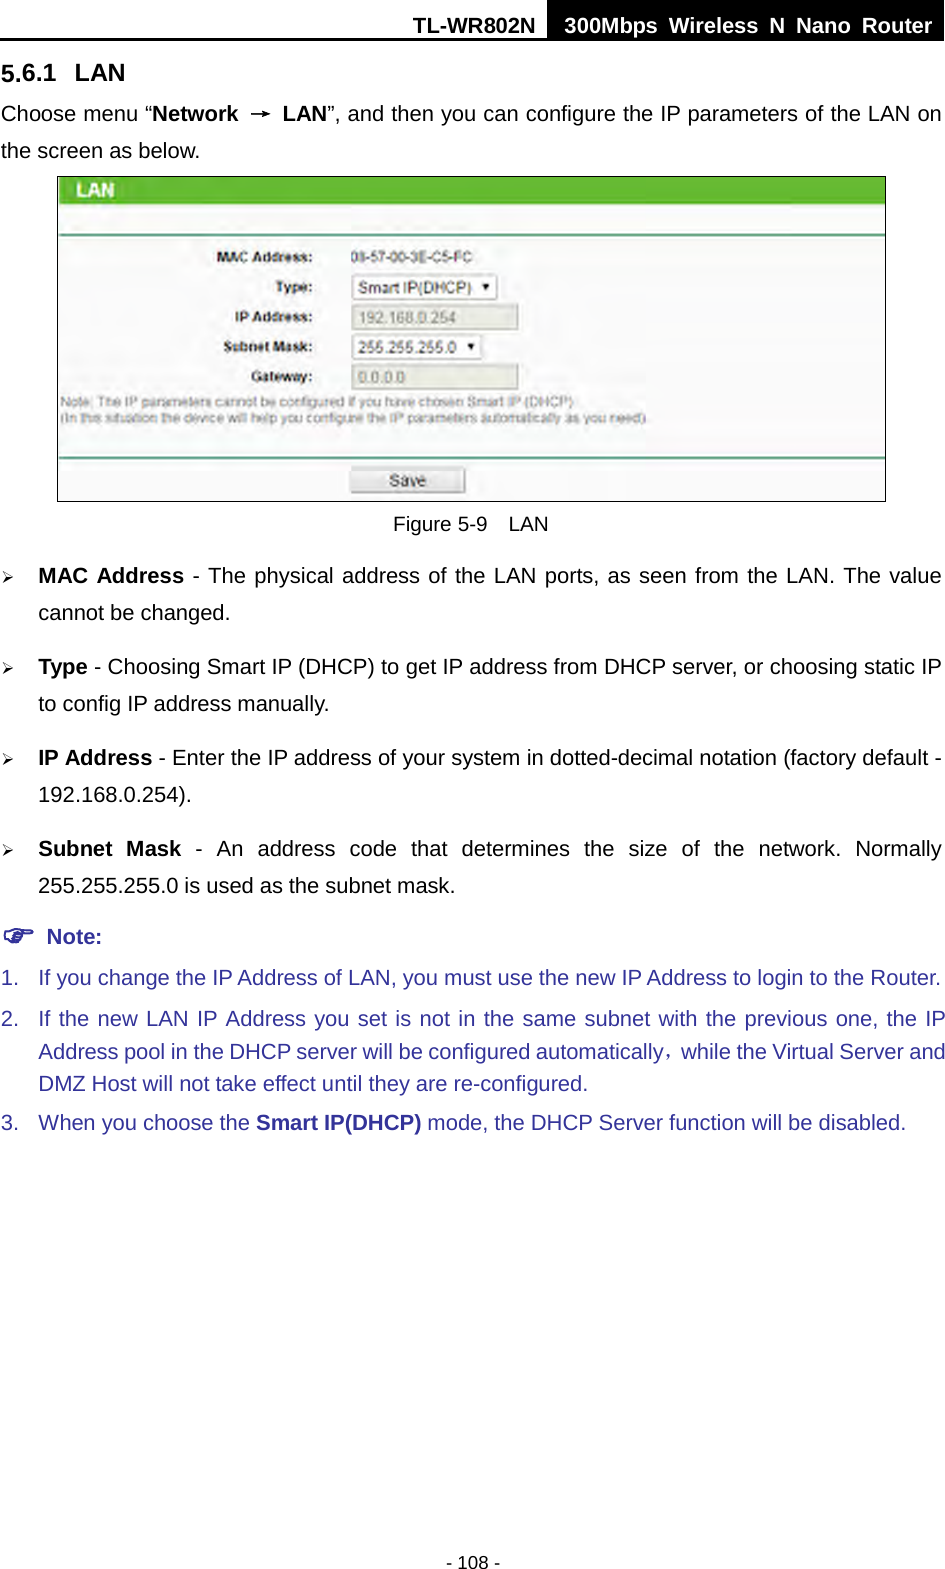 TL-WR802N  300Mbps Wireless N Nano Router  5.6.1 LAN Choose menu “Network  → LAN”, and then you can configure the IP parameters of the LAN on the screen as below.  Figure 5-9  LAN  MAC Address - The physical address of the LAN ports, as seen from the LAN. The value cannot be changed.  Type - Choosing Smart IP (DHCP) to get IP address from DHCP server, or choosing static IP to config IP address manually.  IP Address - Enter the IP address of your system in dotted-decimal notation (factory default - 192.168.0.254).  Subnet Mask - An address code that determines the size of the network. Normally 255.255.255.0 is used as the subnet mask.  Note: 1. If you change the IP Address of LAN, you must use the new IP Address to login to the Router.   2. If the new LAN IP Address you set is not in the same subnet with the previous one, the IP Address pool in the DHCP server will be configured automatically，while the Virtual Server and DMZ Host will not take effect until they are re-configured. 3. When you choose the Smart IP(DHCP) mode, the DHCP Server function will be disabled. - 108 - 